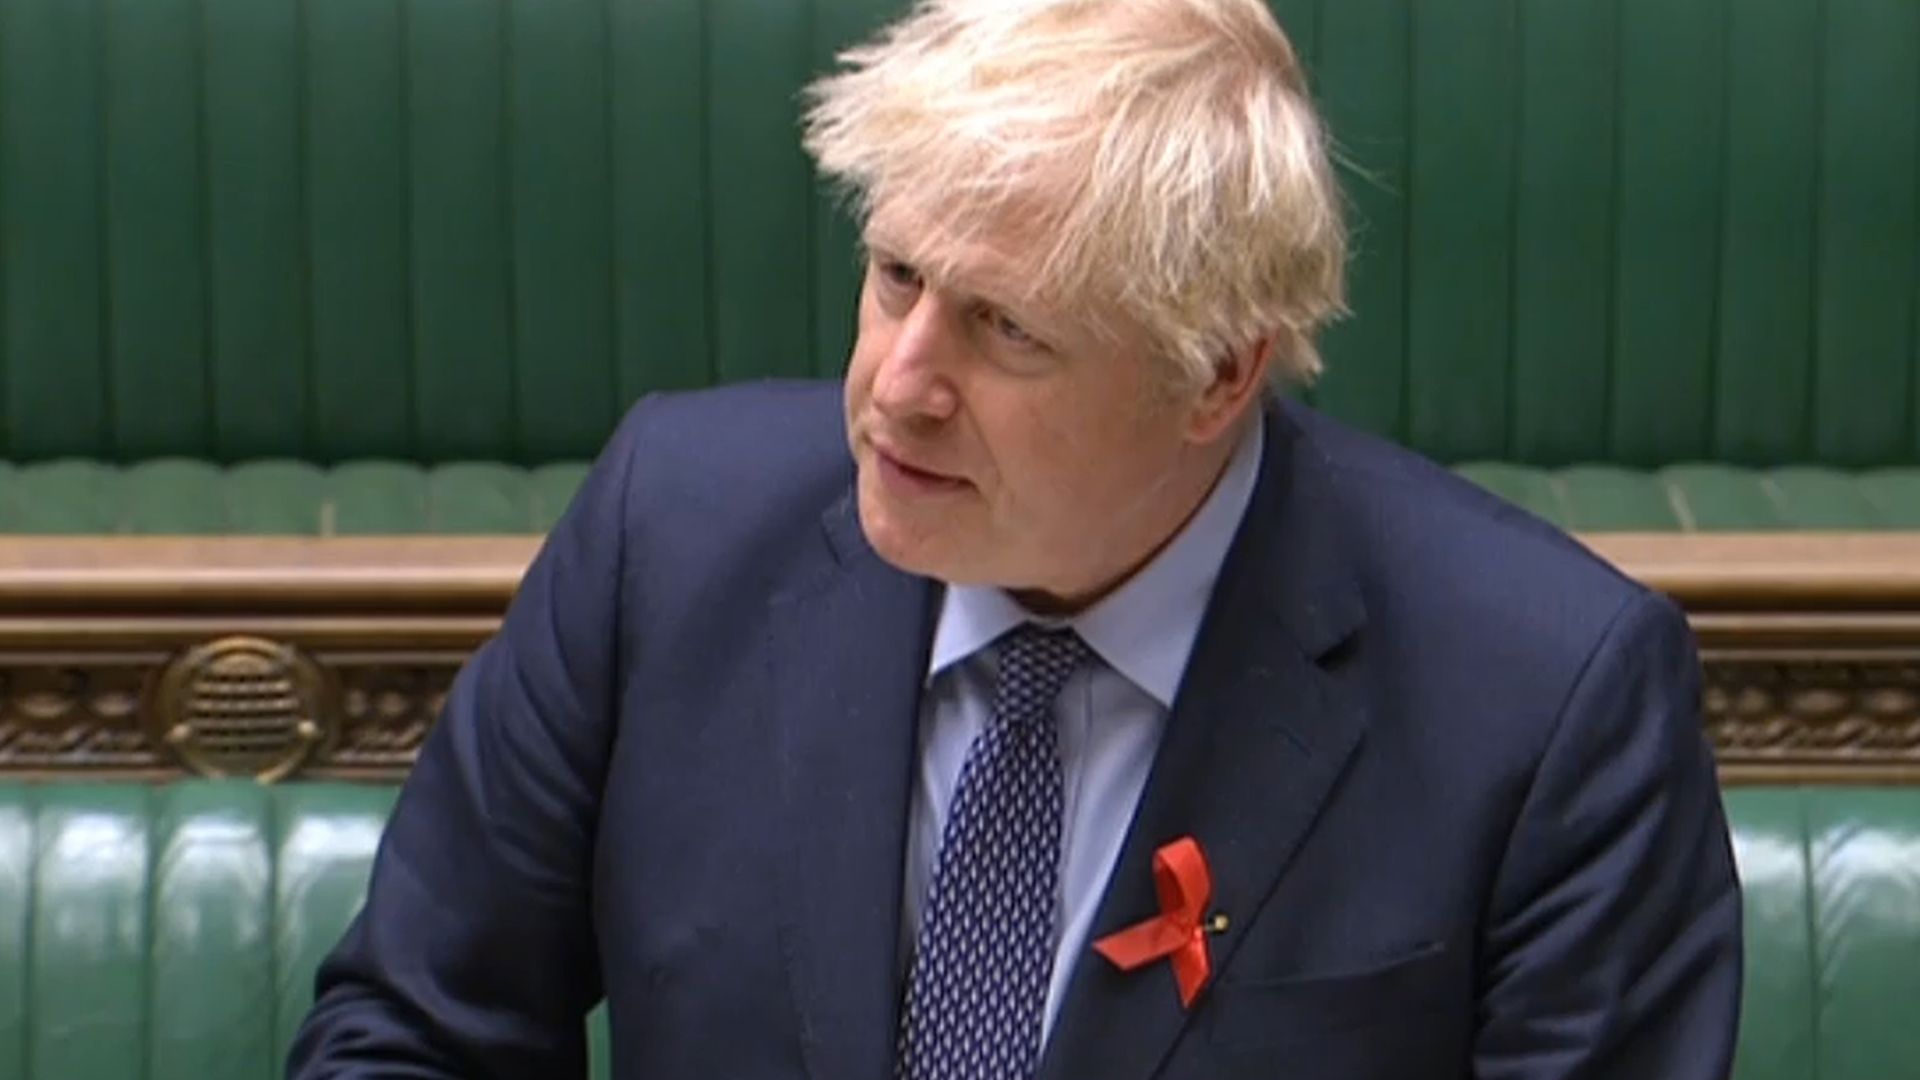 Prime minister Boris Johnson in the House of Commons, London - Credit: PA